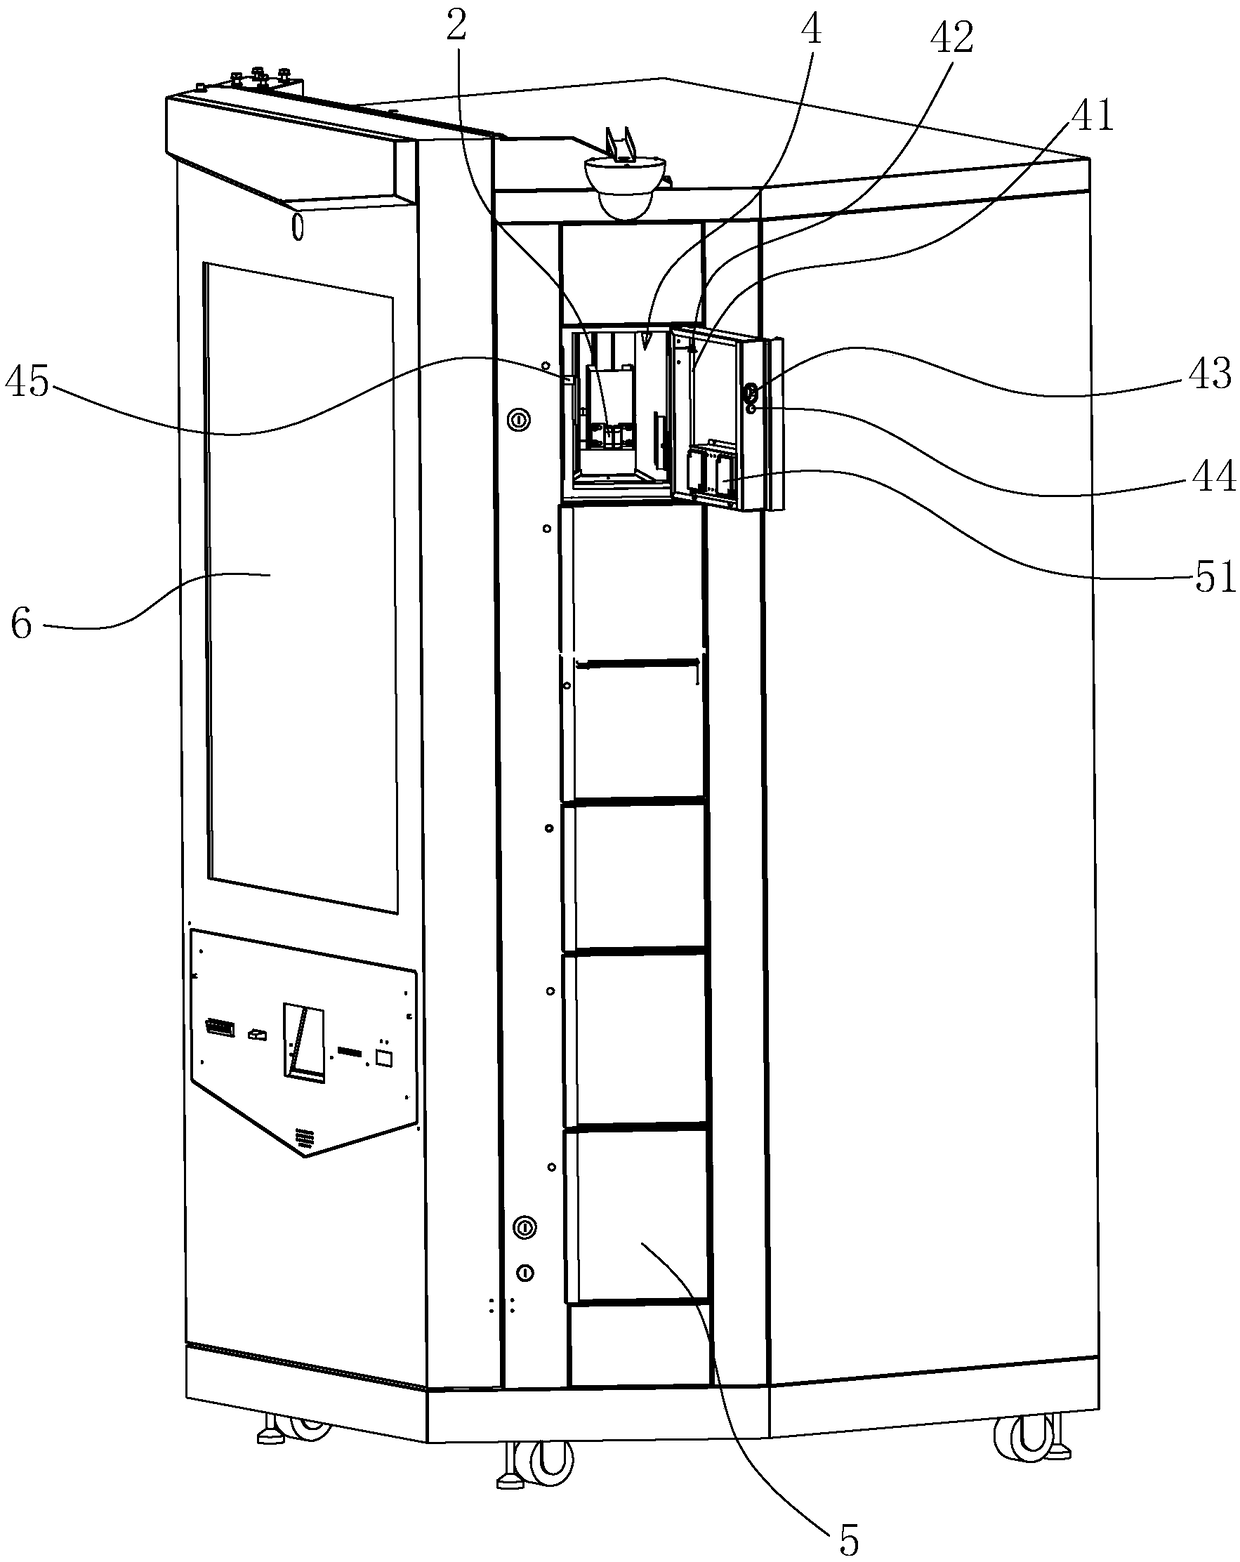 Storing and withdrawing method of goods storing and withdrawing cabinet